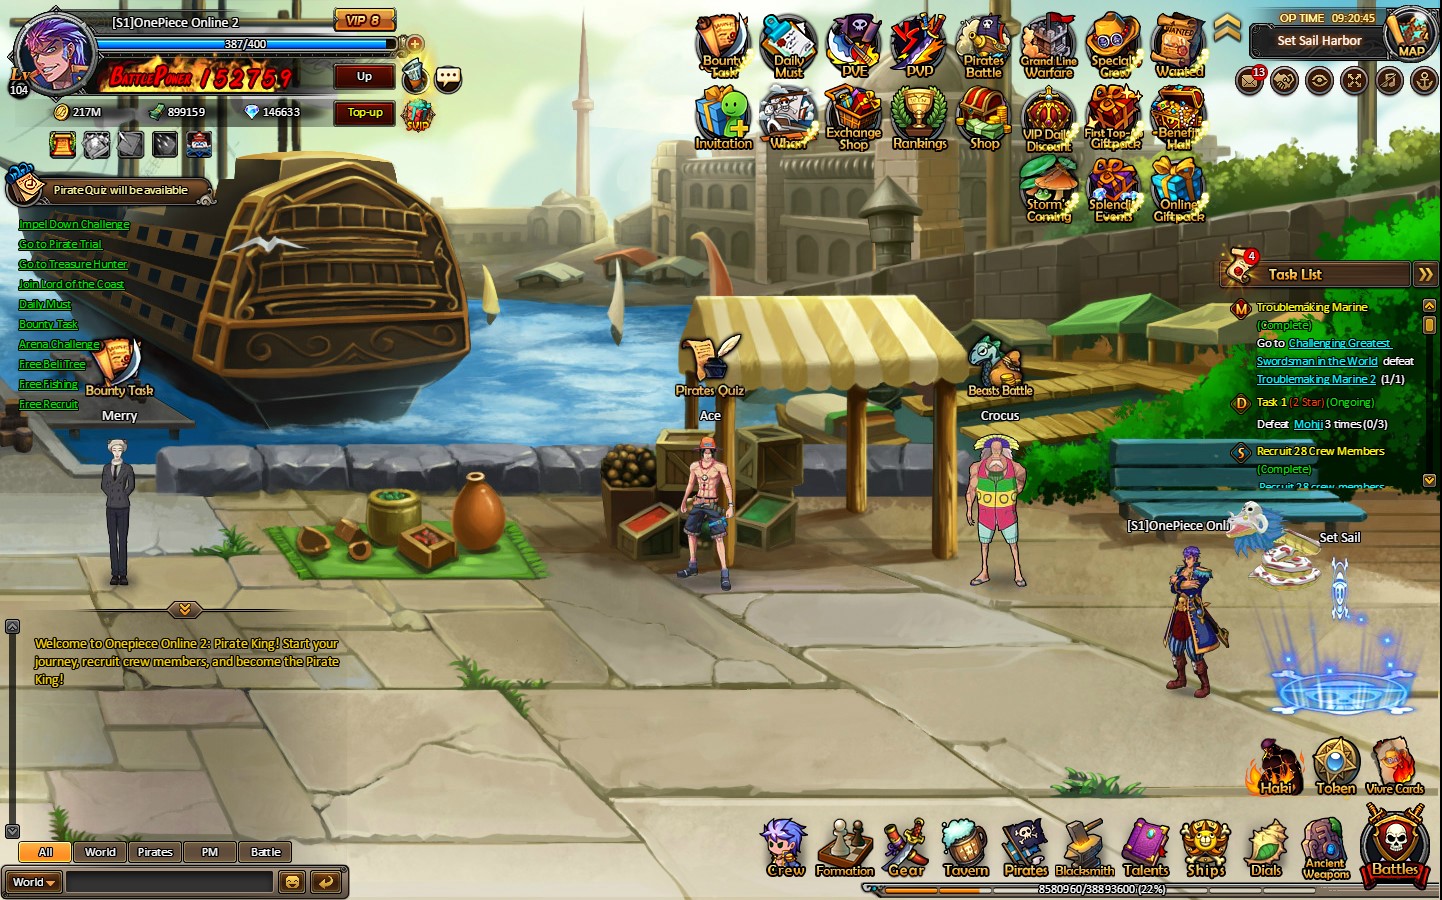 one piece game pc